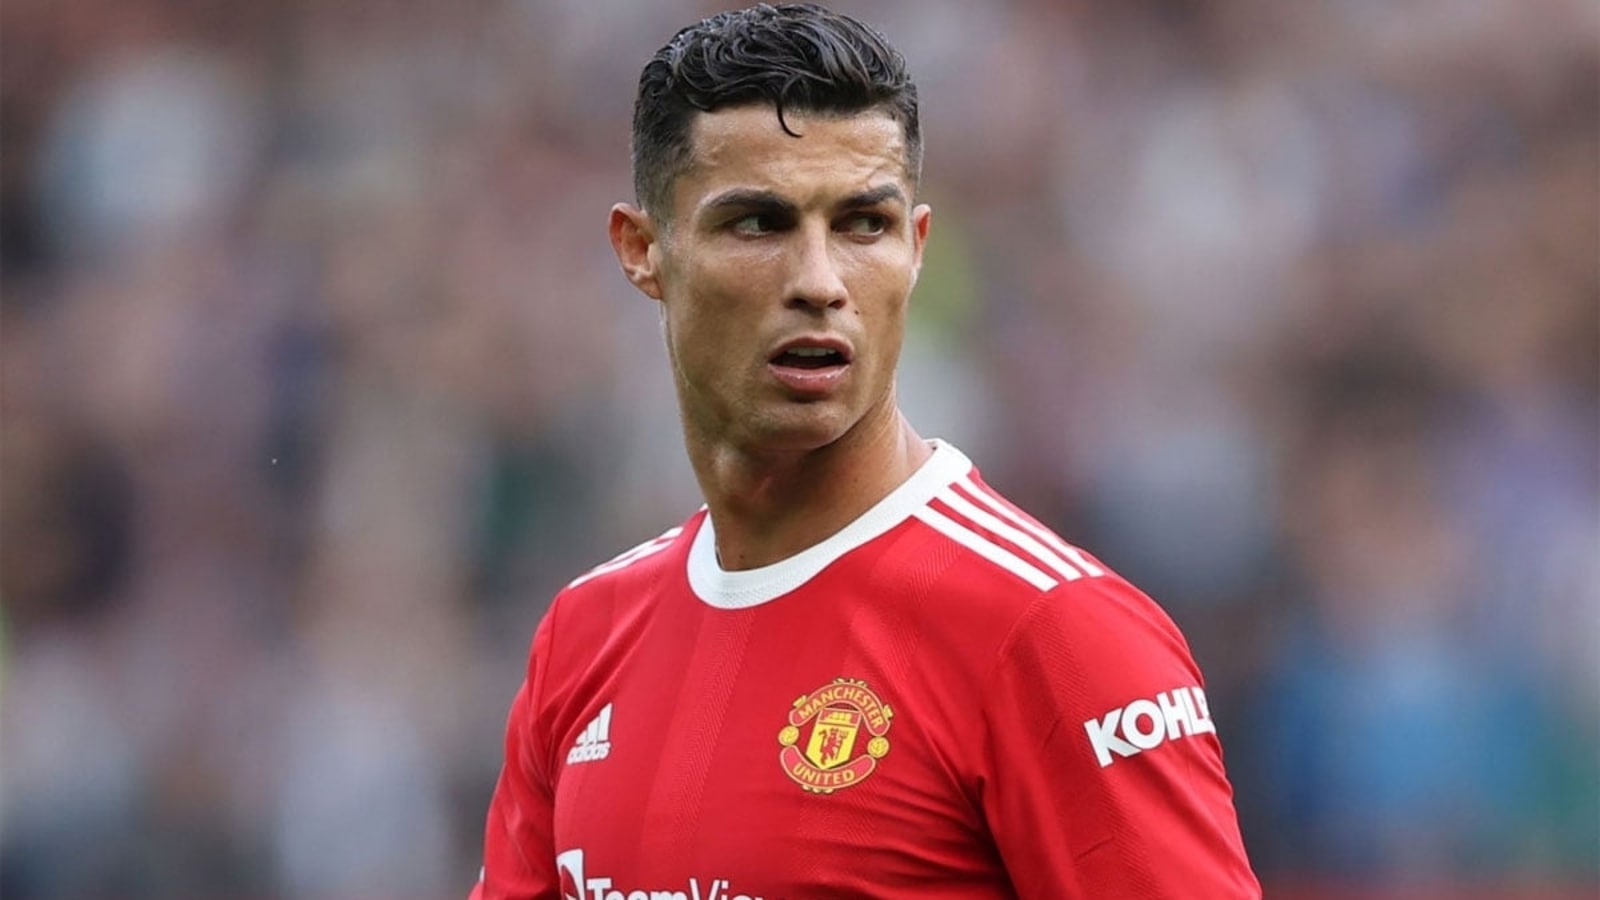 Manchester United’s Cristiano Ronaldo to miss Liverpool match after death of newborn twin